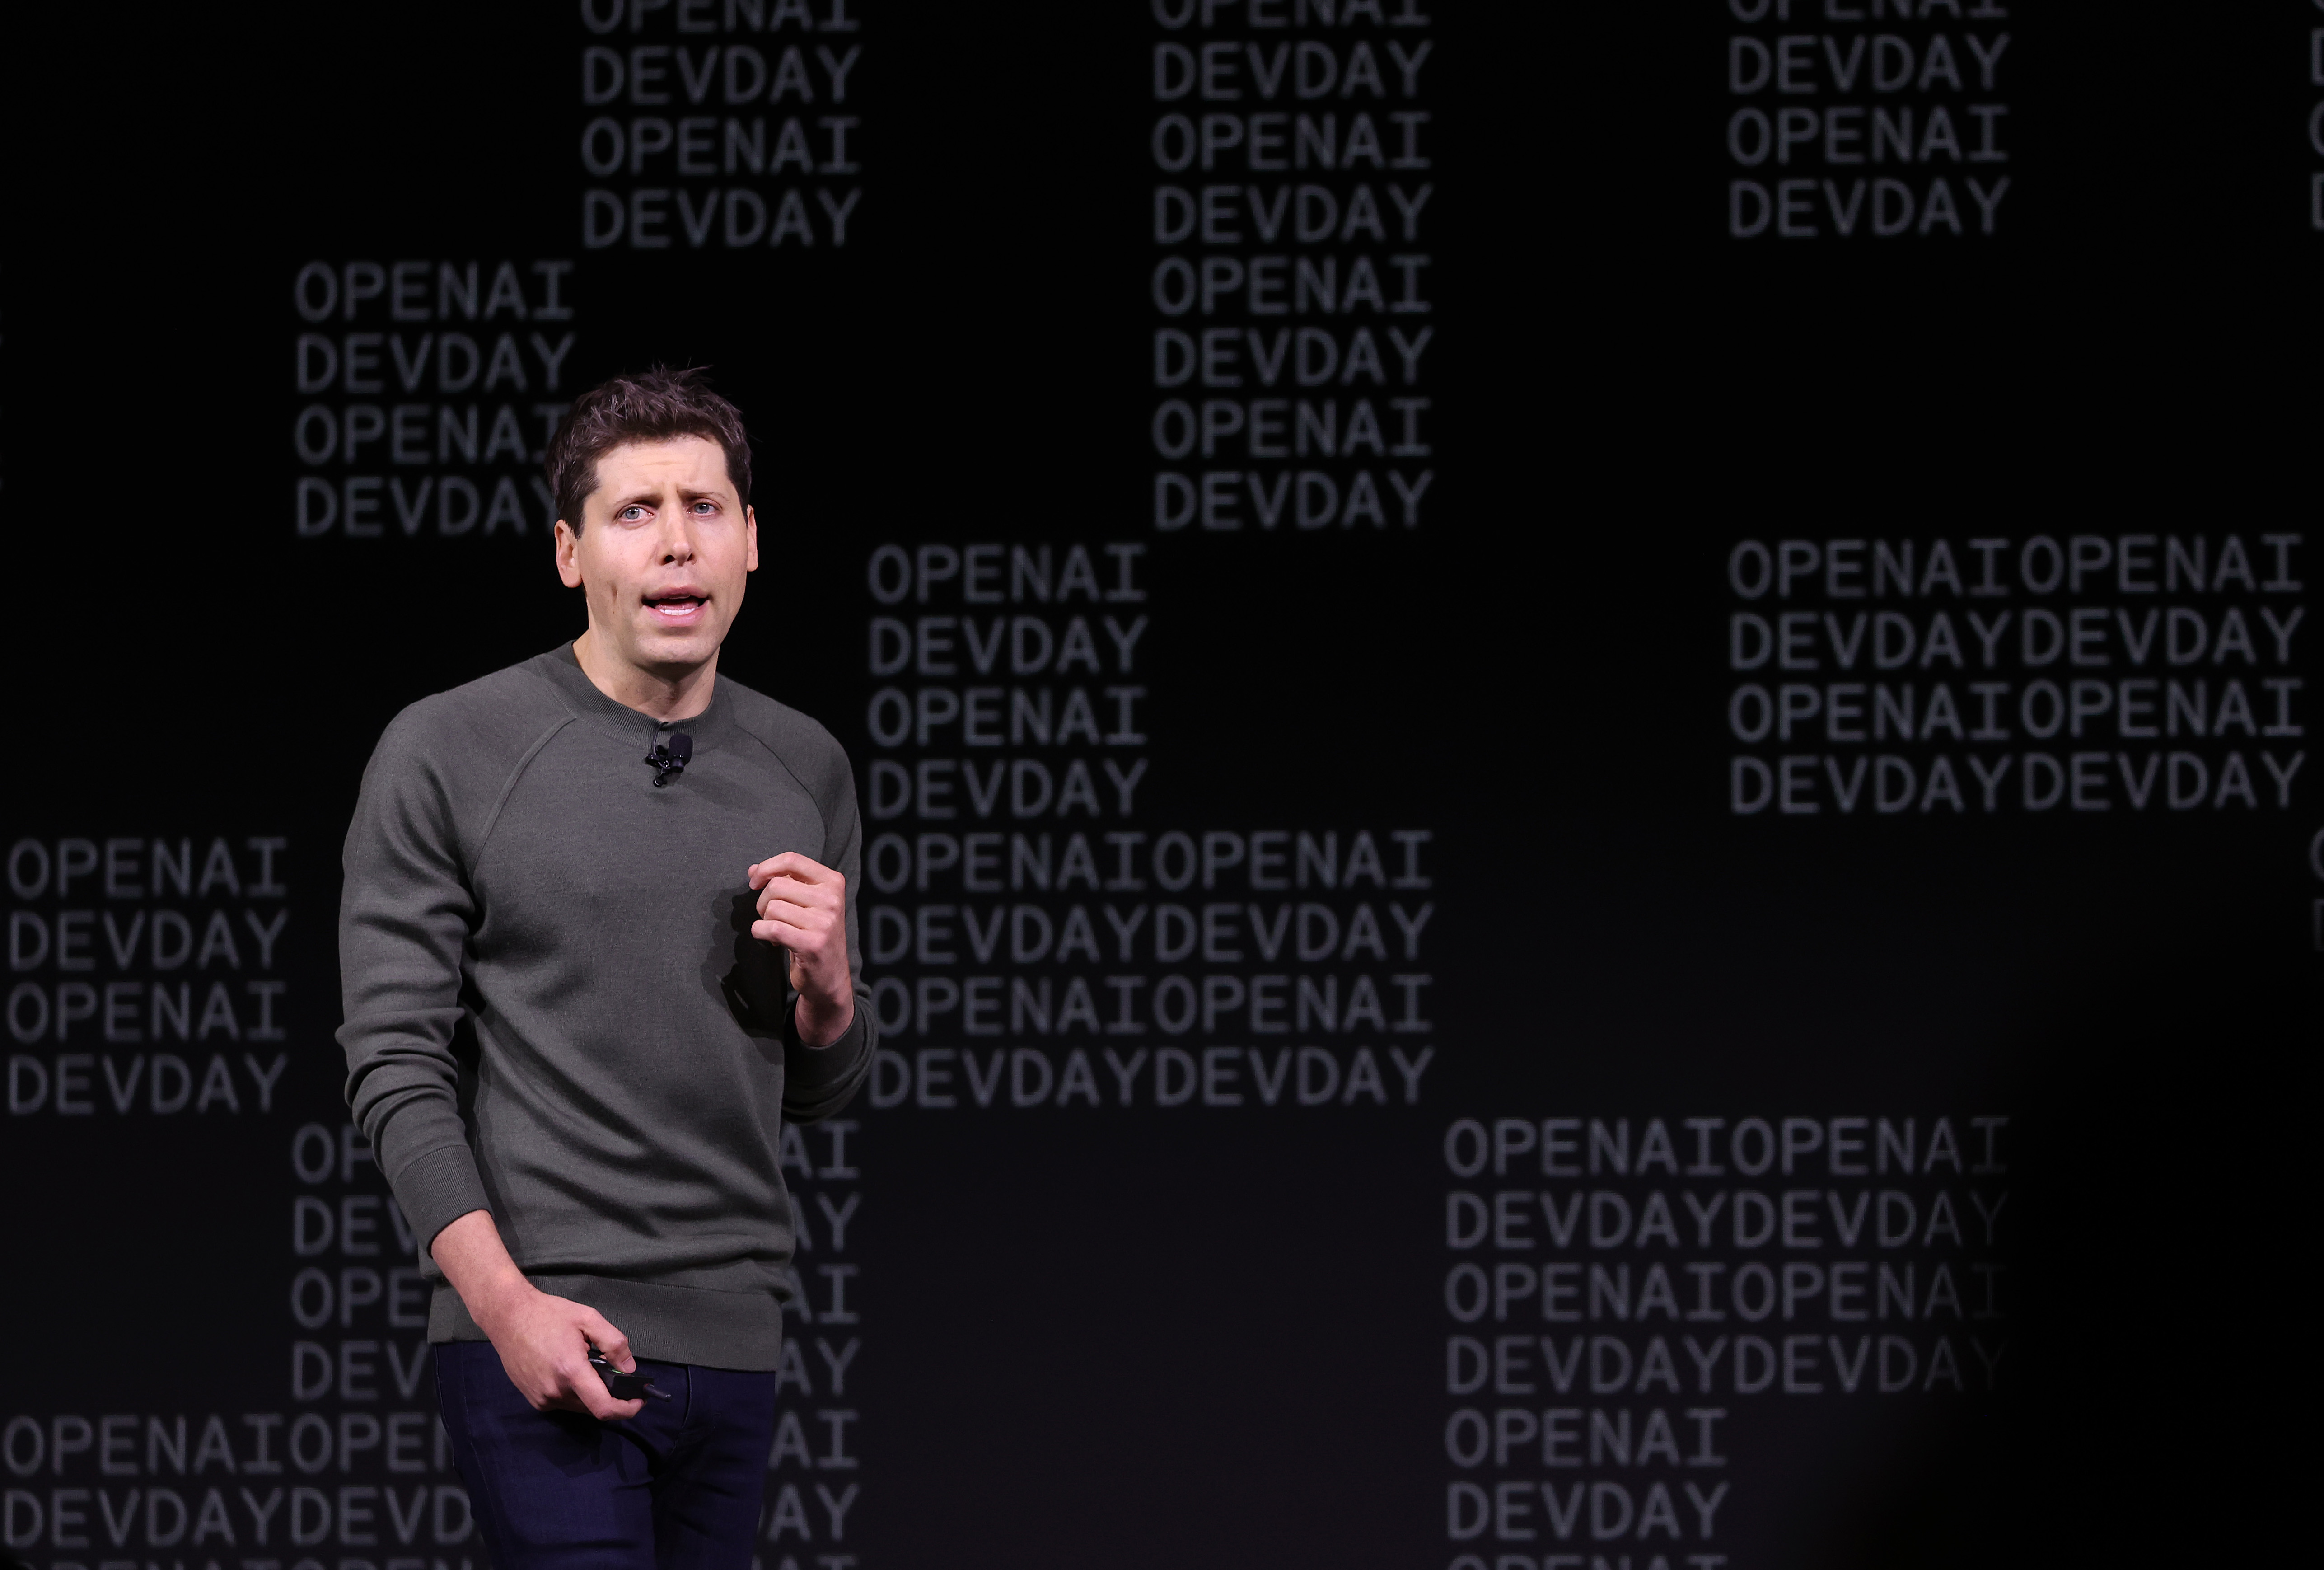 OpenAI CEO Sam Altman speaking at the firm's inaugural developer day in November 2023